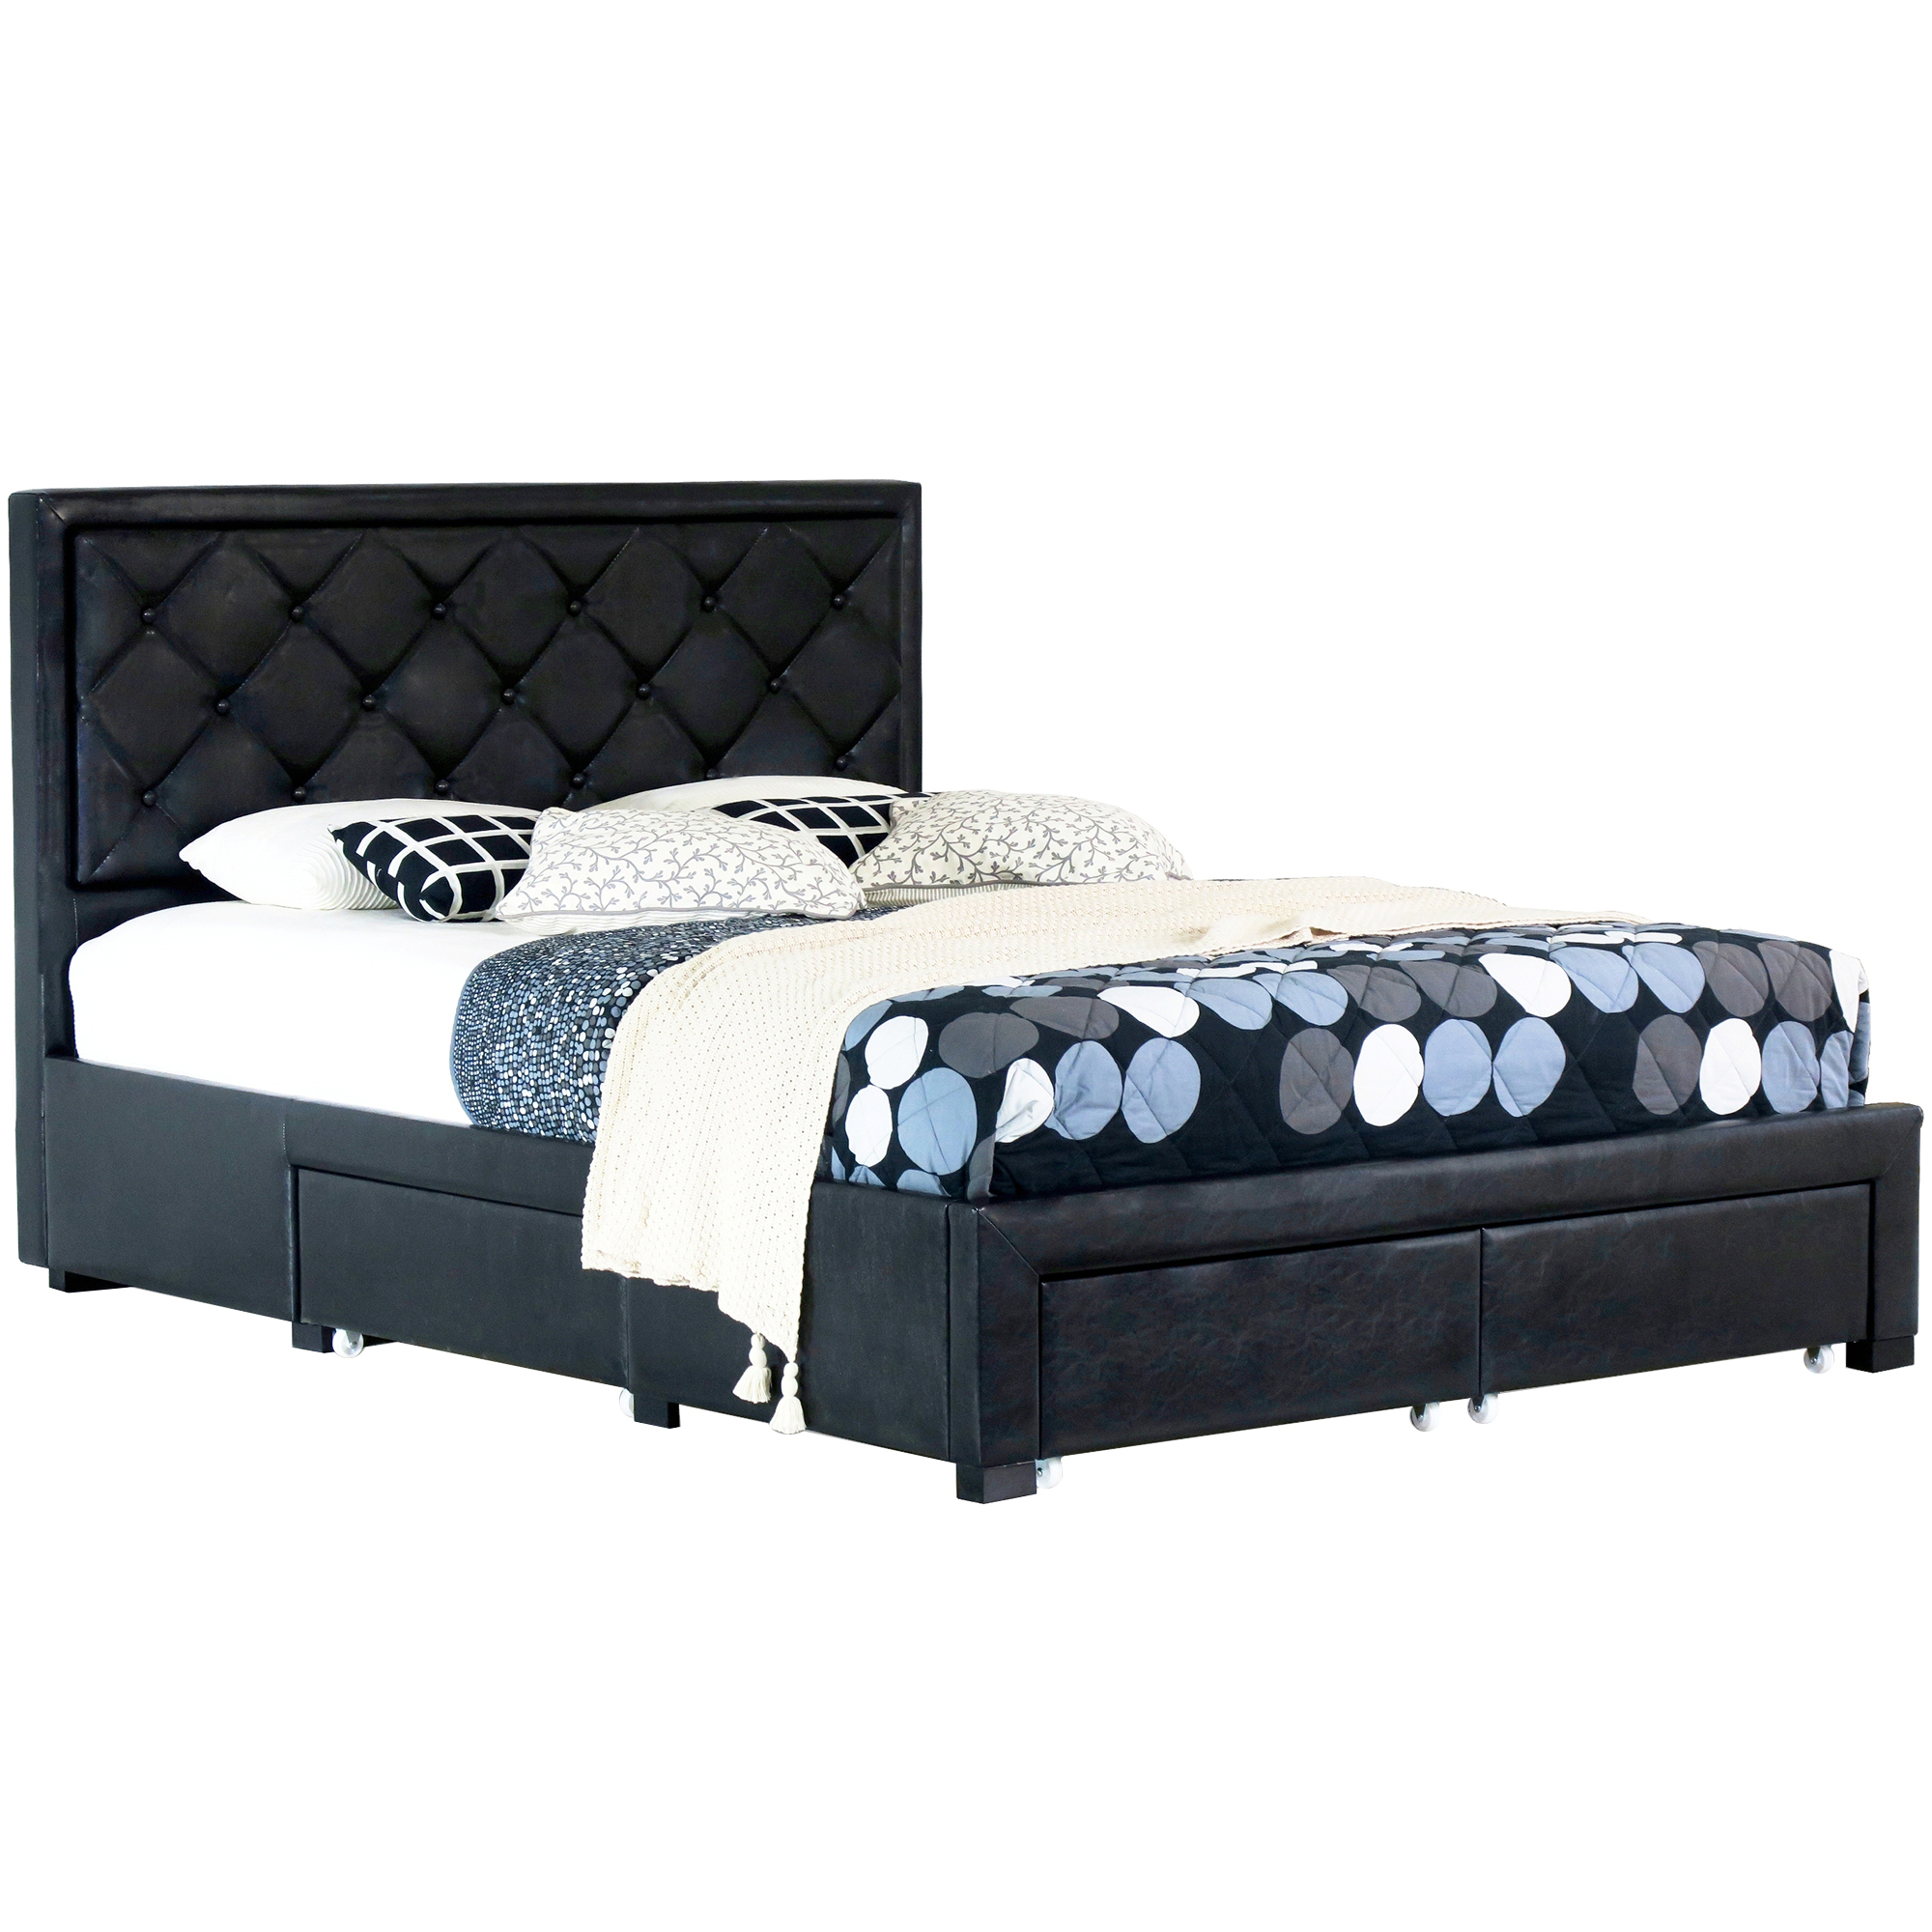 Faux Leather Bed Frame With Storage, Black Leather Sleigh Bed With Storage